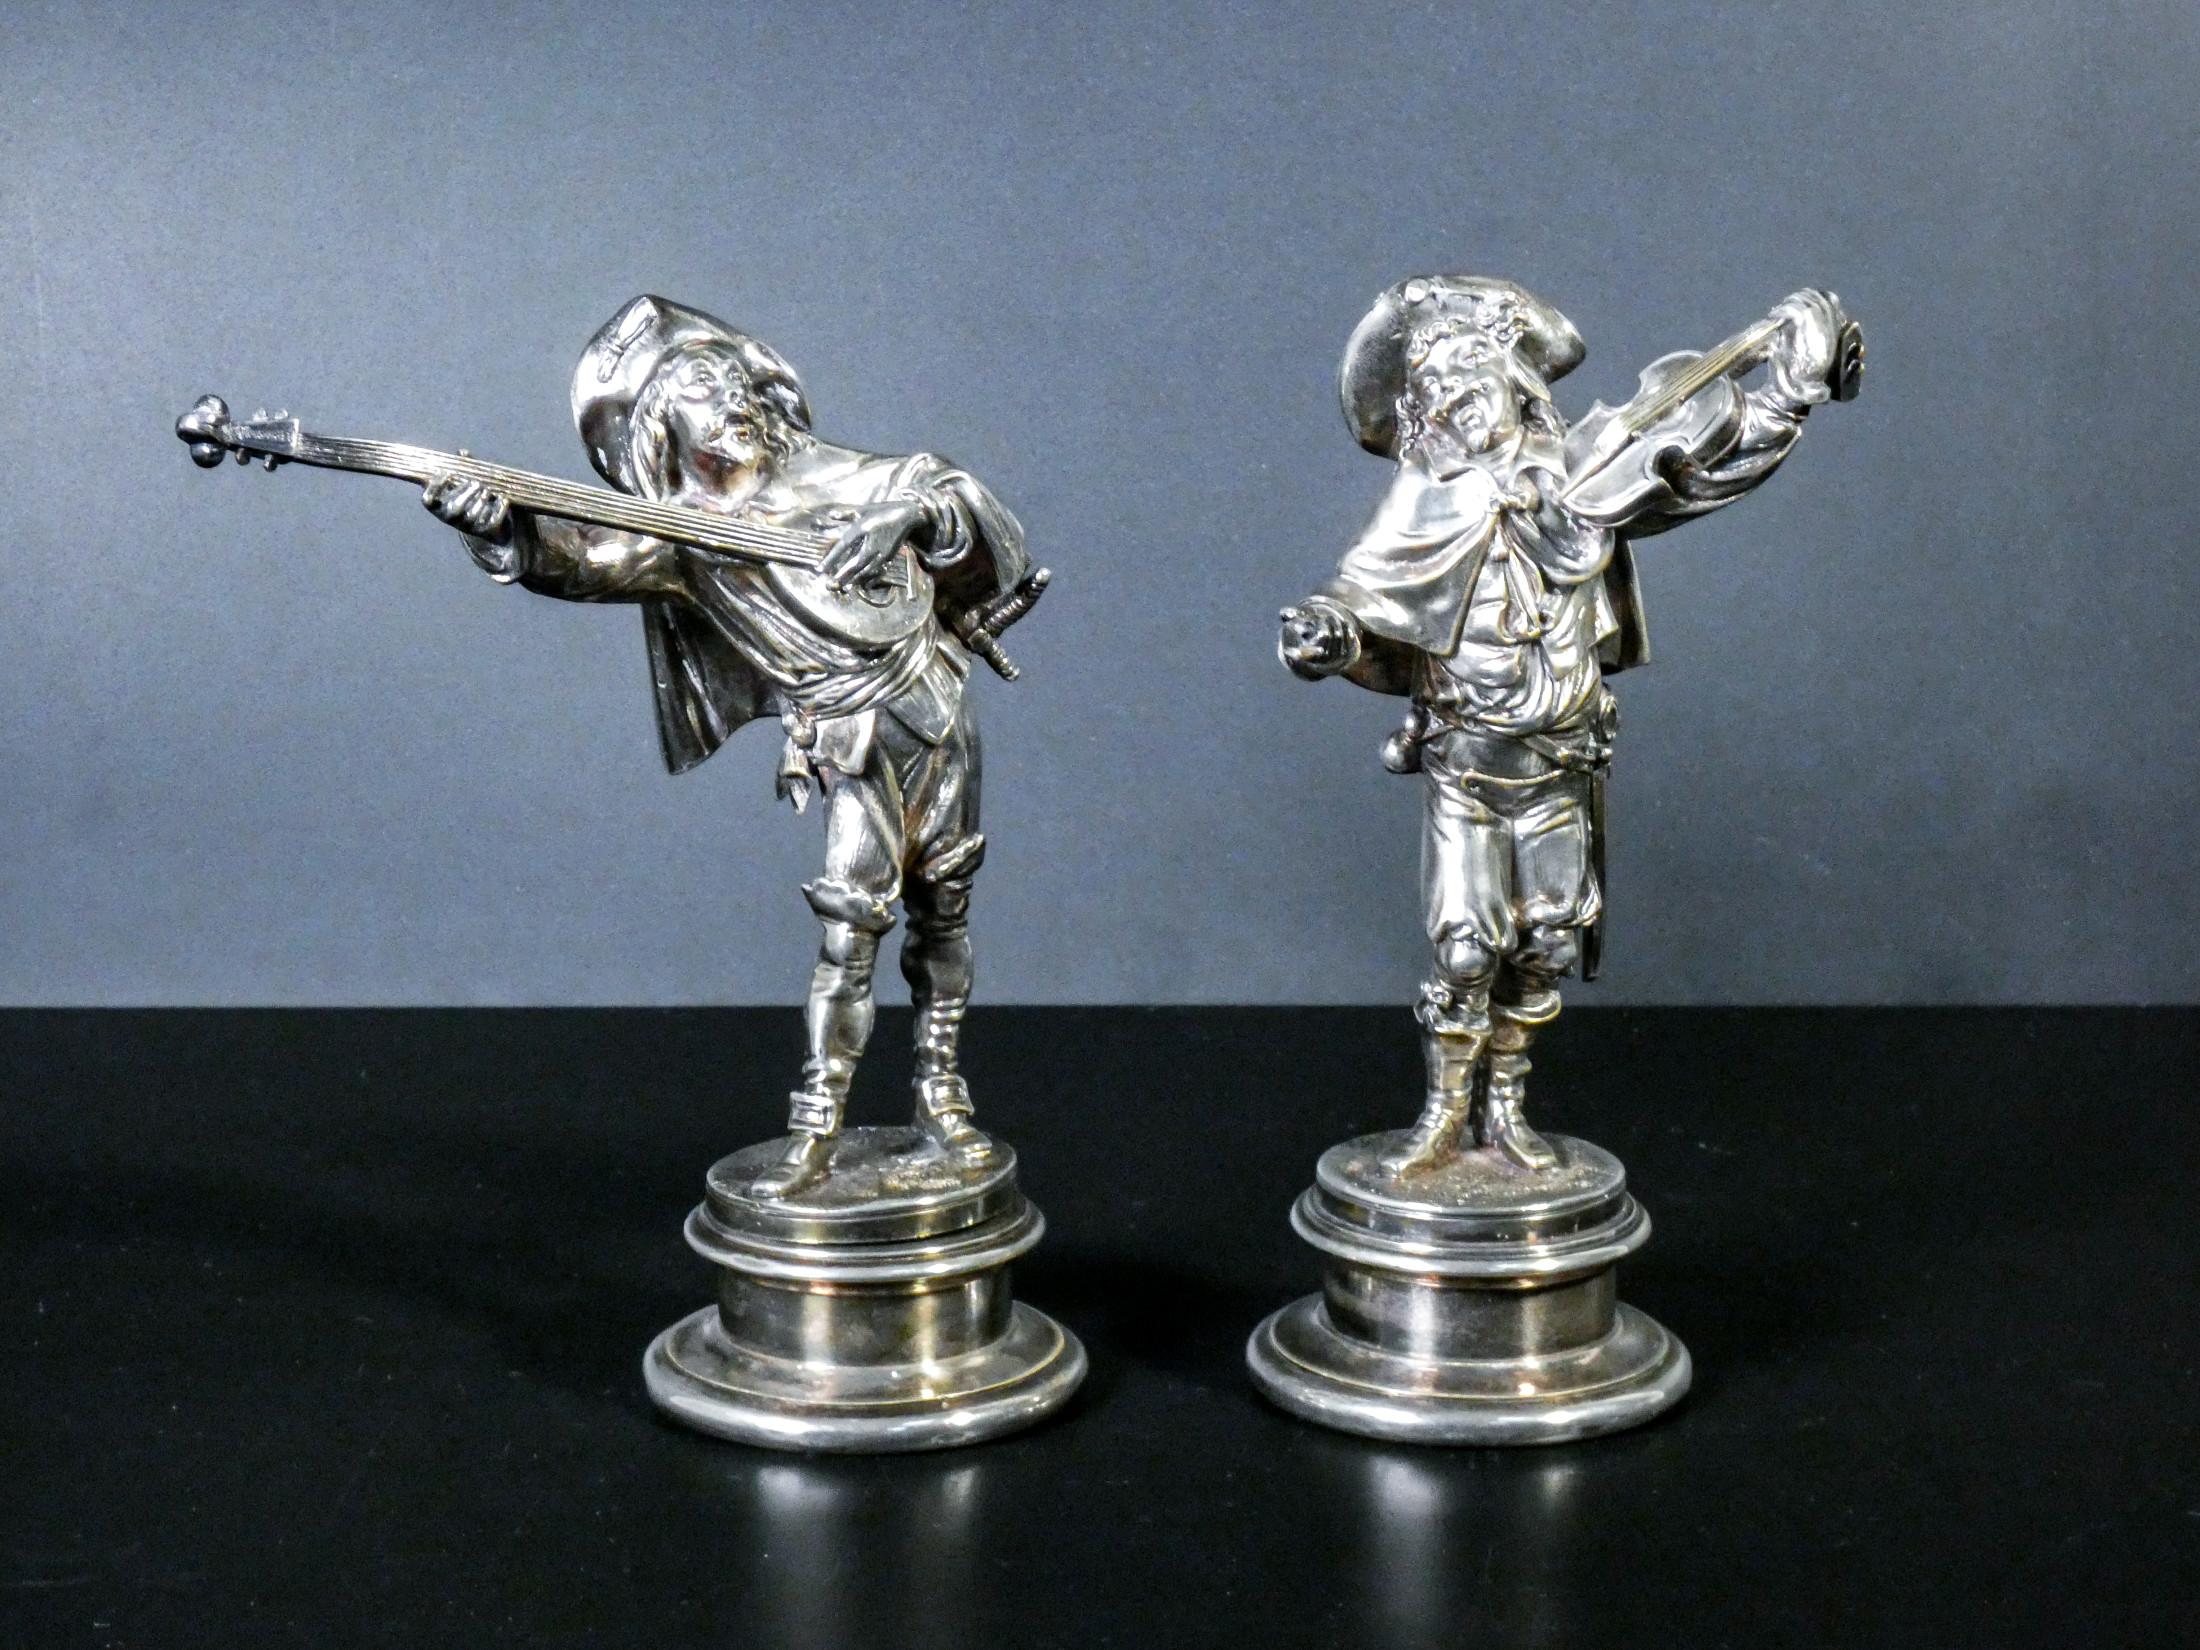 Pair of Sheffield sculptures
signed Emile Guillemin,
Players
Origin
France
Period
1800
Author
The pieces are signed on the base
Émile Guillemin
(1841 - 1907)
Model
Pair of Players
Materials
Sheffield
Dimensions
H 16 cm
14 X 7